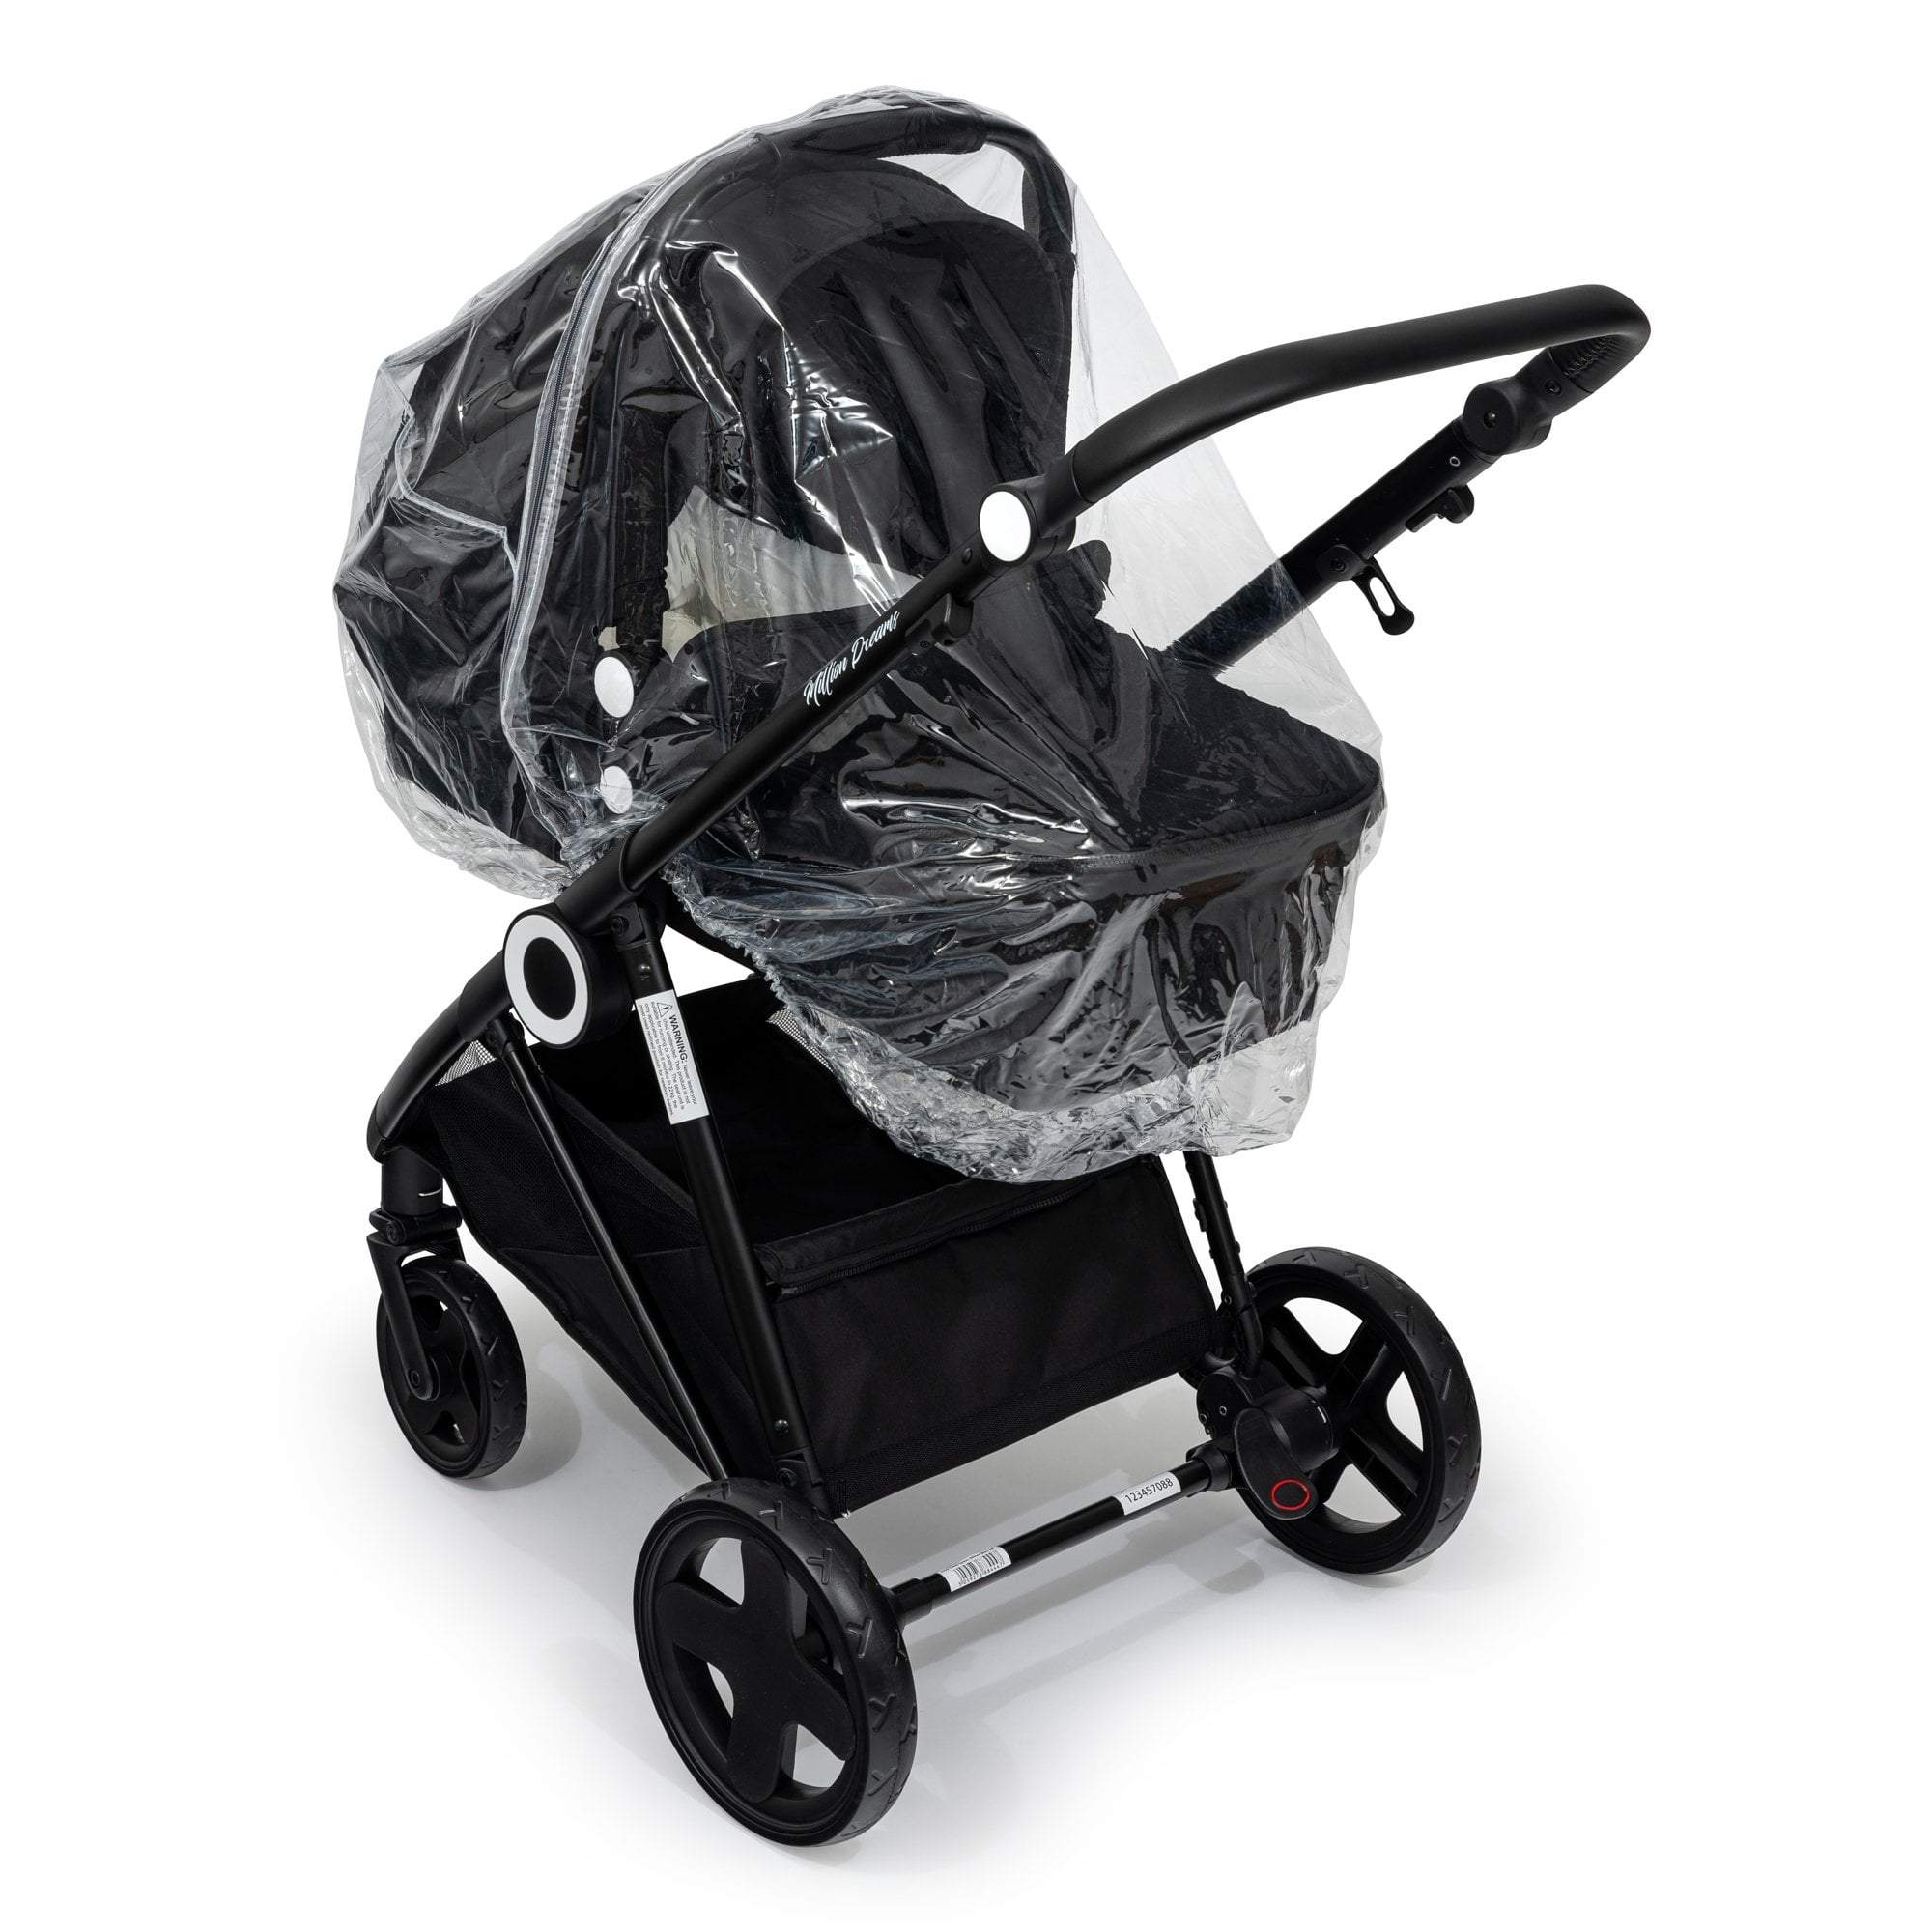 Carrycot Raincover Compatible With Britax - Fits All Models - For Your Little One